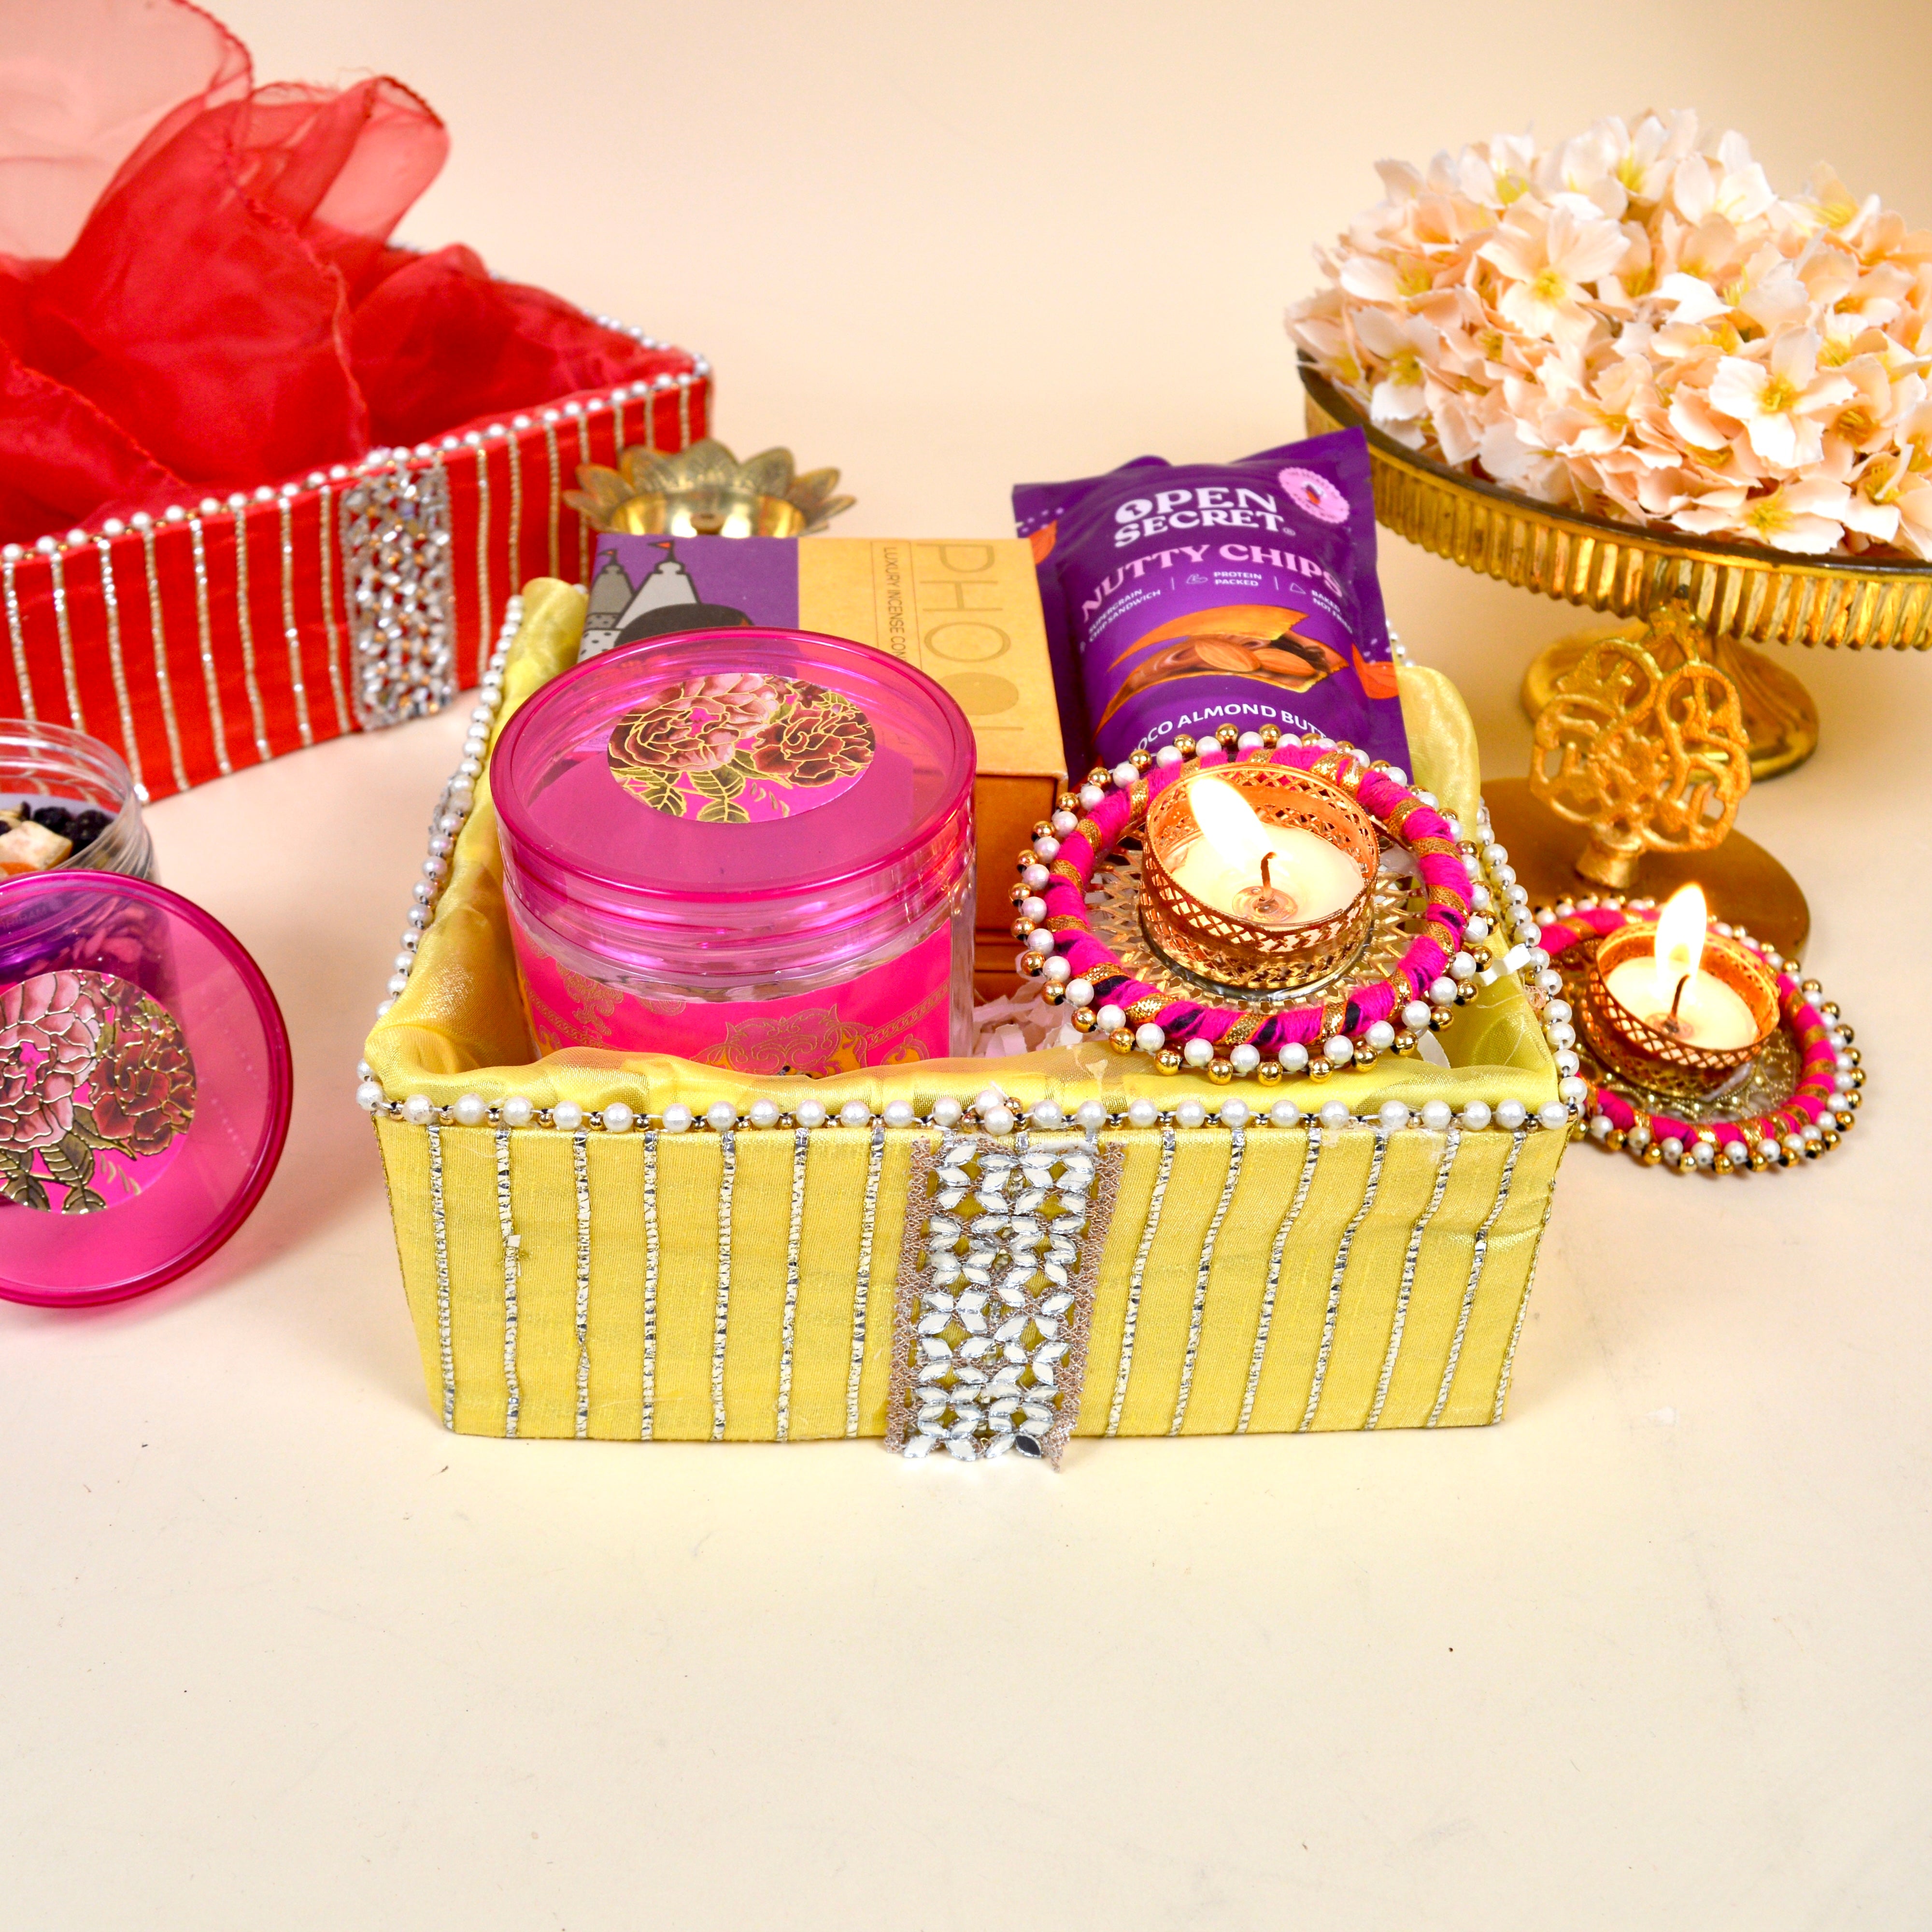 Send Online Hamper for Goodness To Gift Someone Special | Winni.in